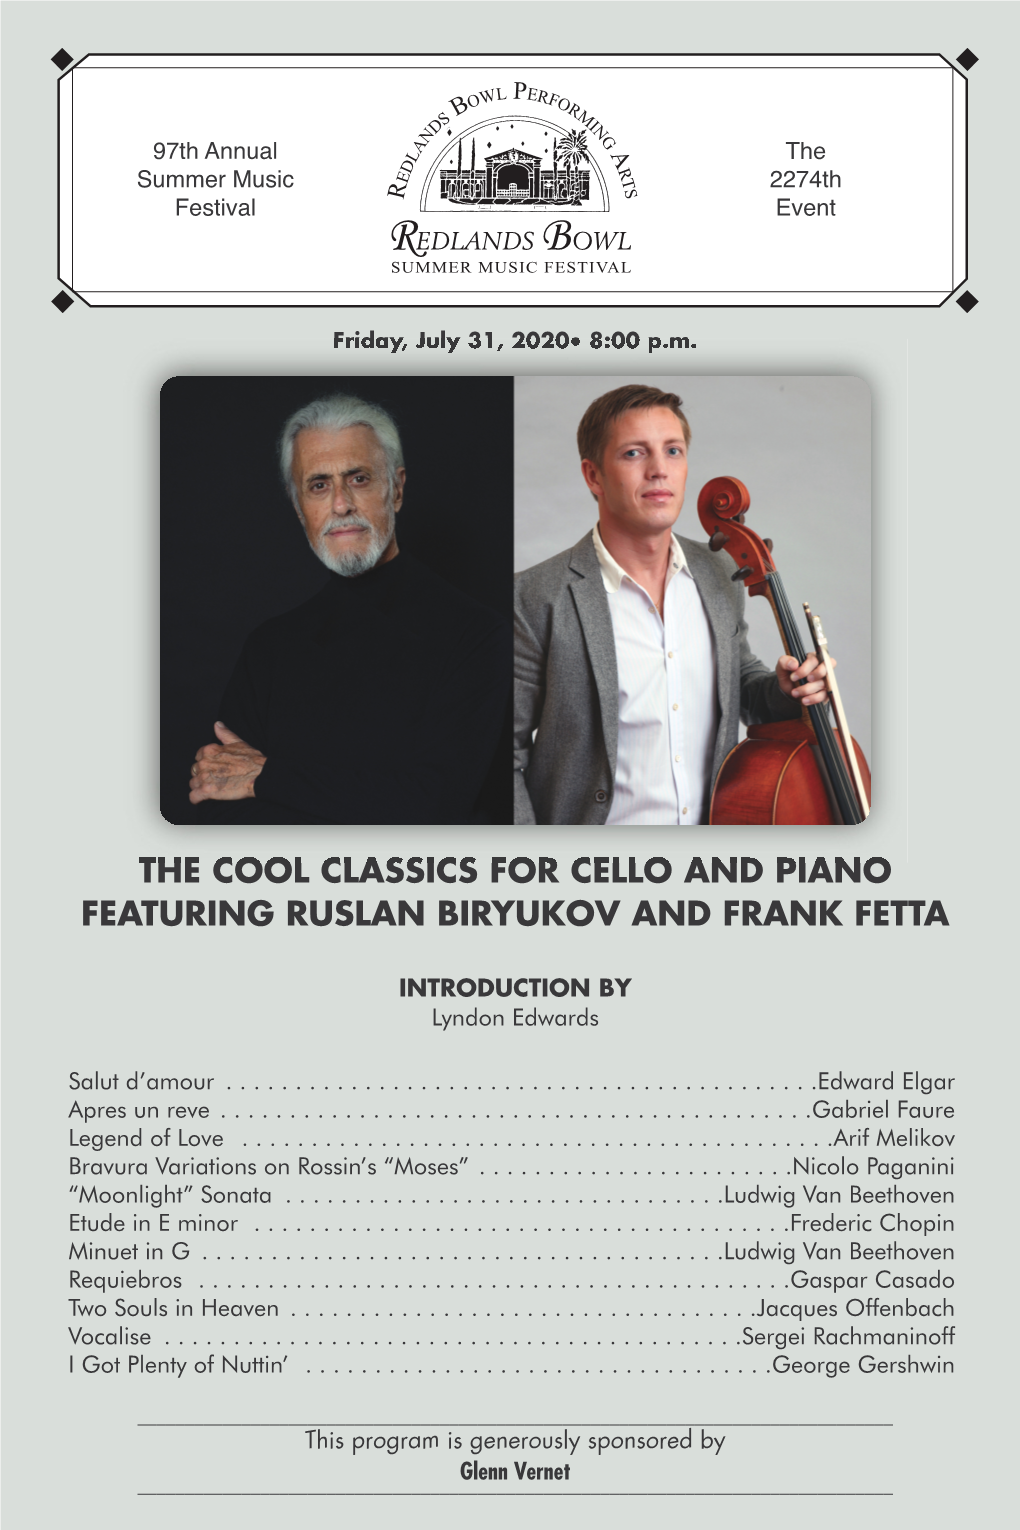 The Cool Classics for Cello and Piano Featuring Ruslan Biryukov and Frank Fetta